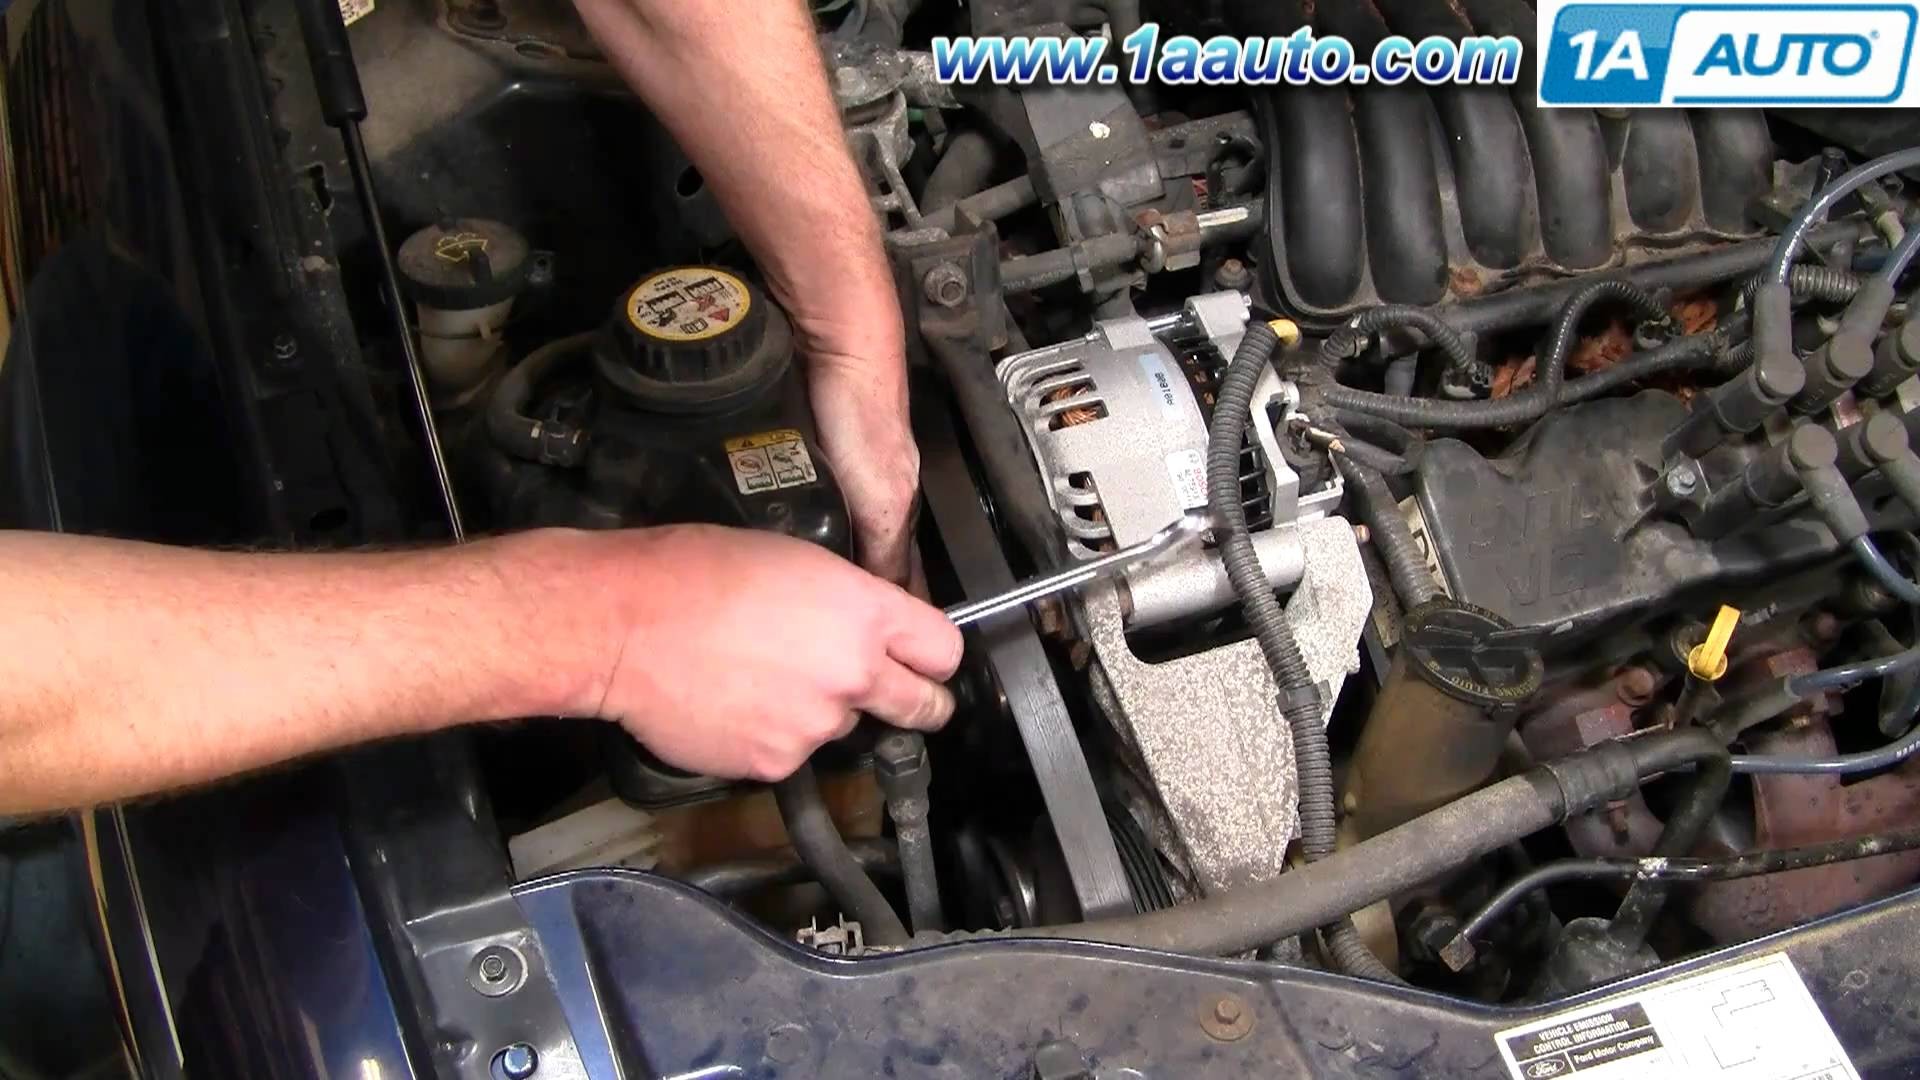 2001 Mercury Sable Engine Diagram How to Install Replace Serpentine Belt Idler Pulley ford Taurus 3 0l